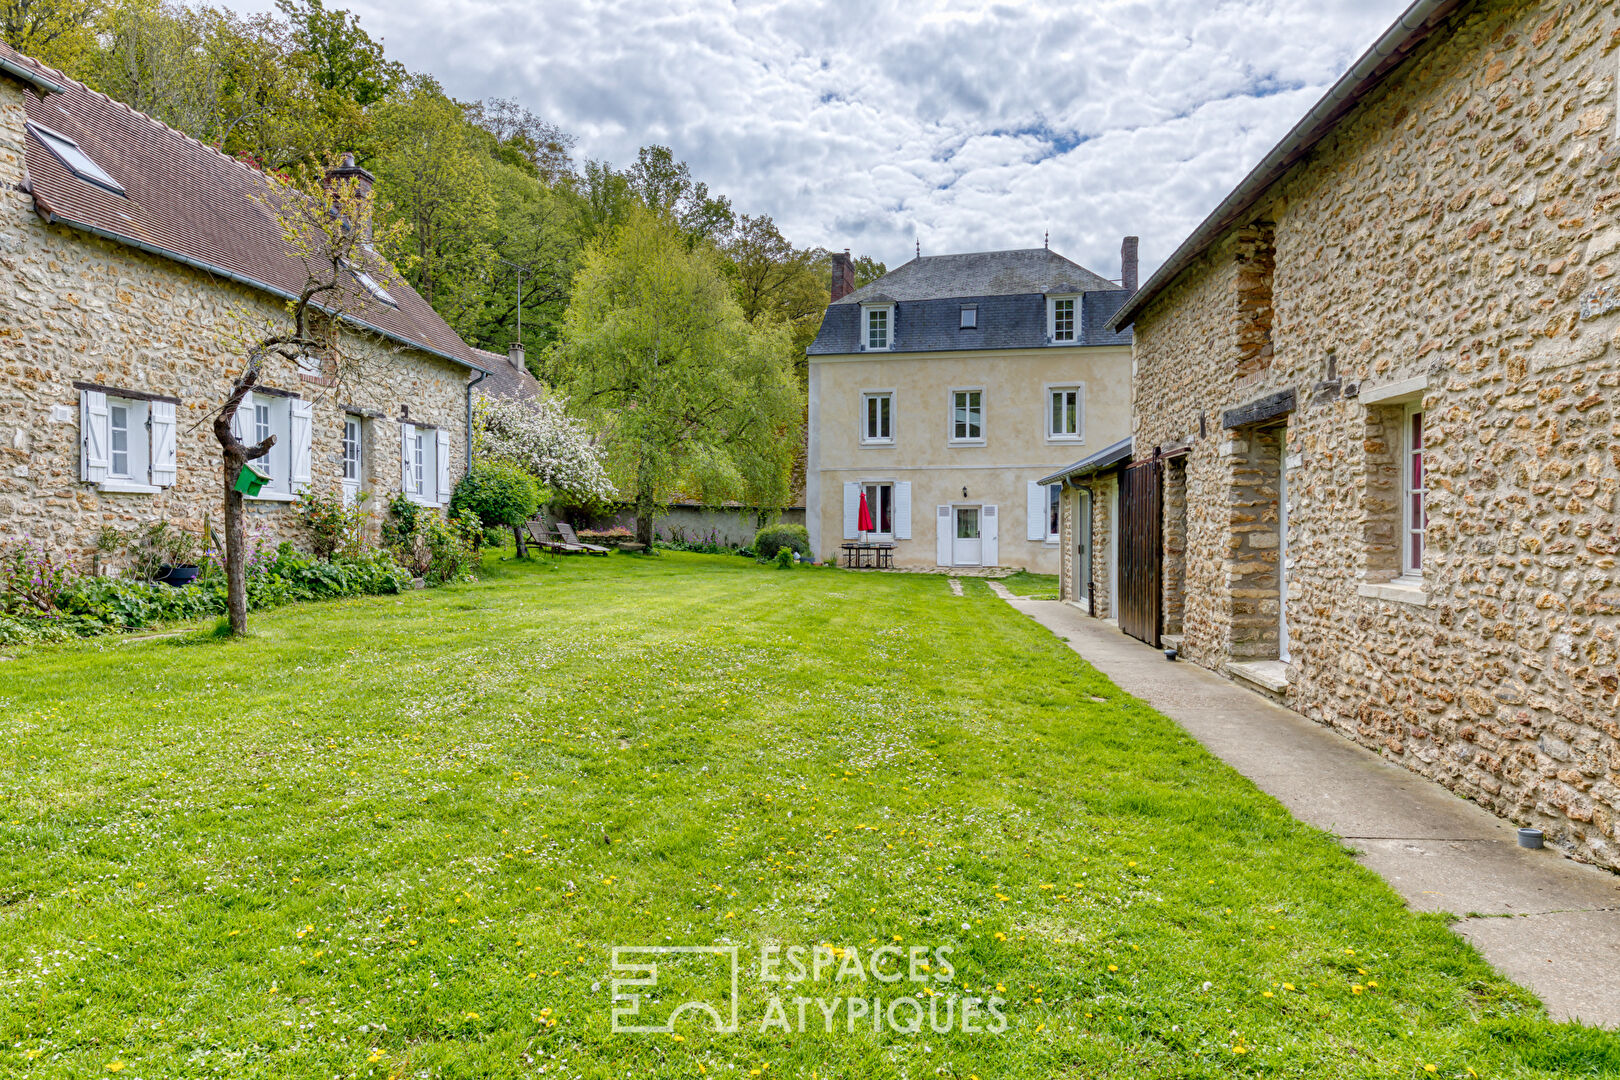 Haven of peace and its outbuildings in the heart of the village